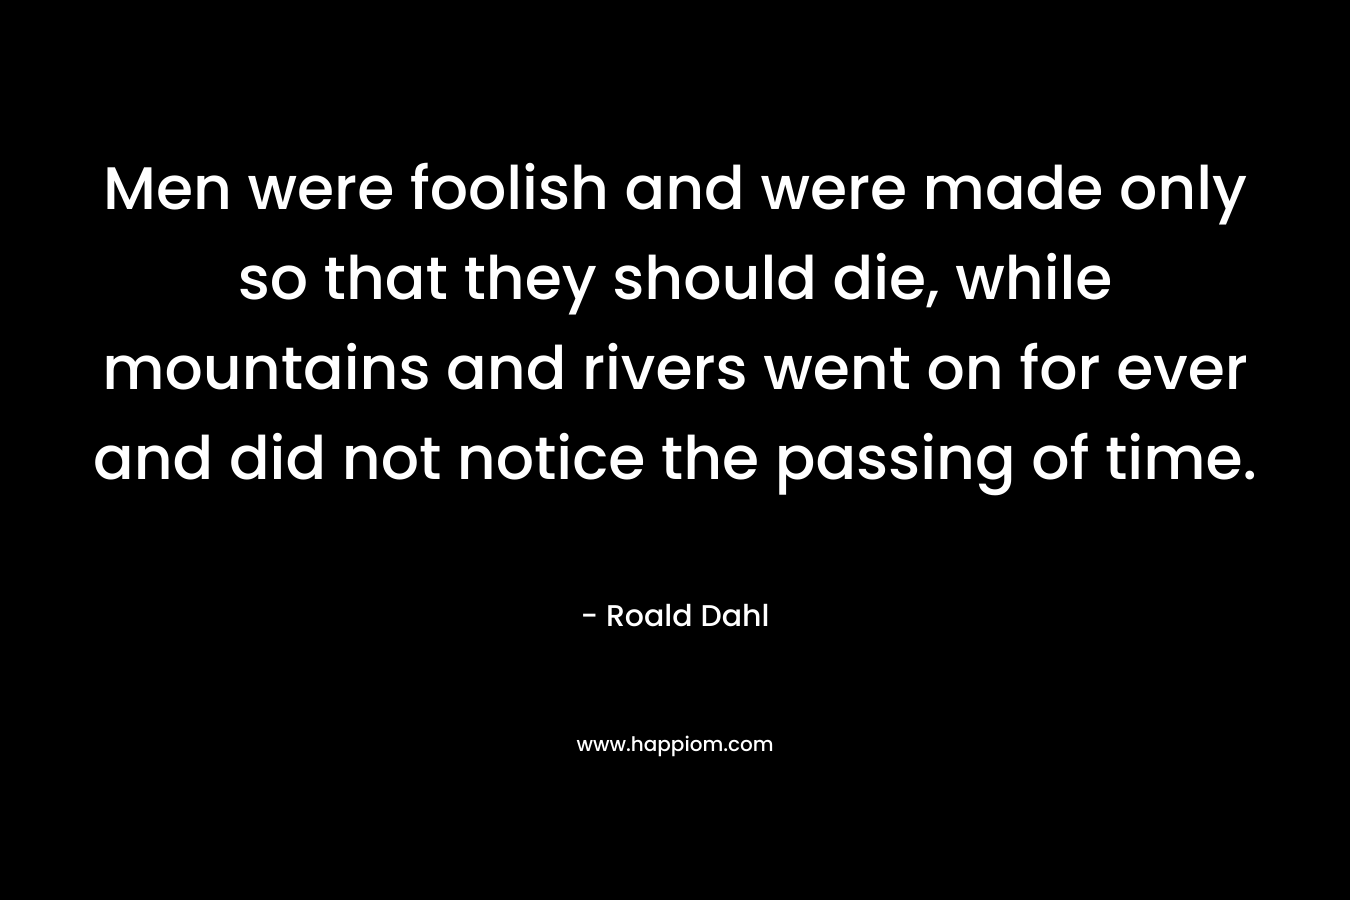 Men were foolish and were made only so that they should die, while mountains and rivers went on for ever and did not notice the passing of time. – Roald Dahl